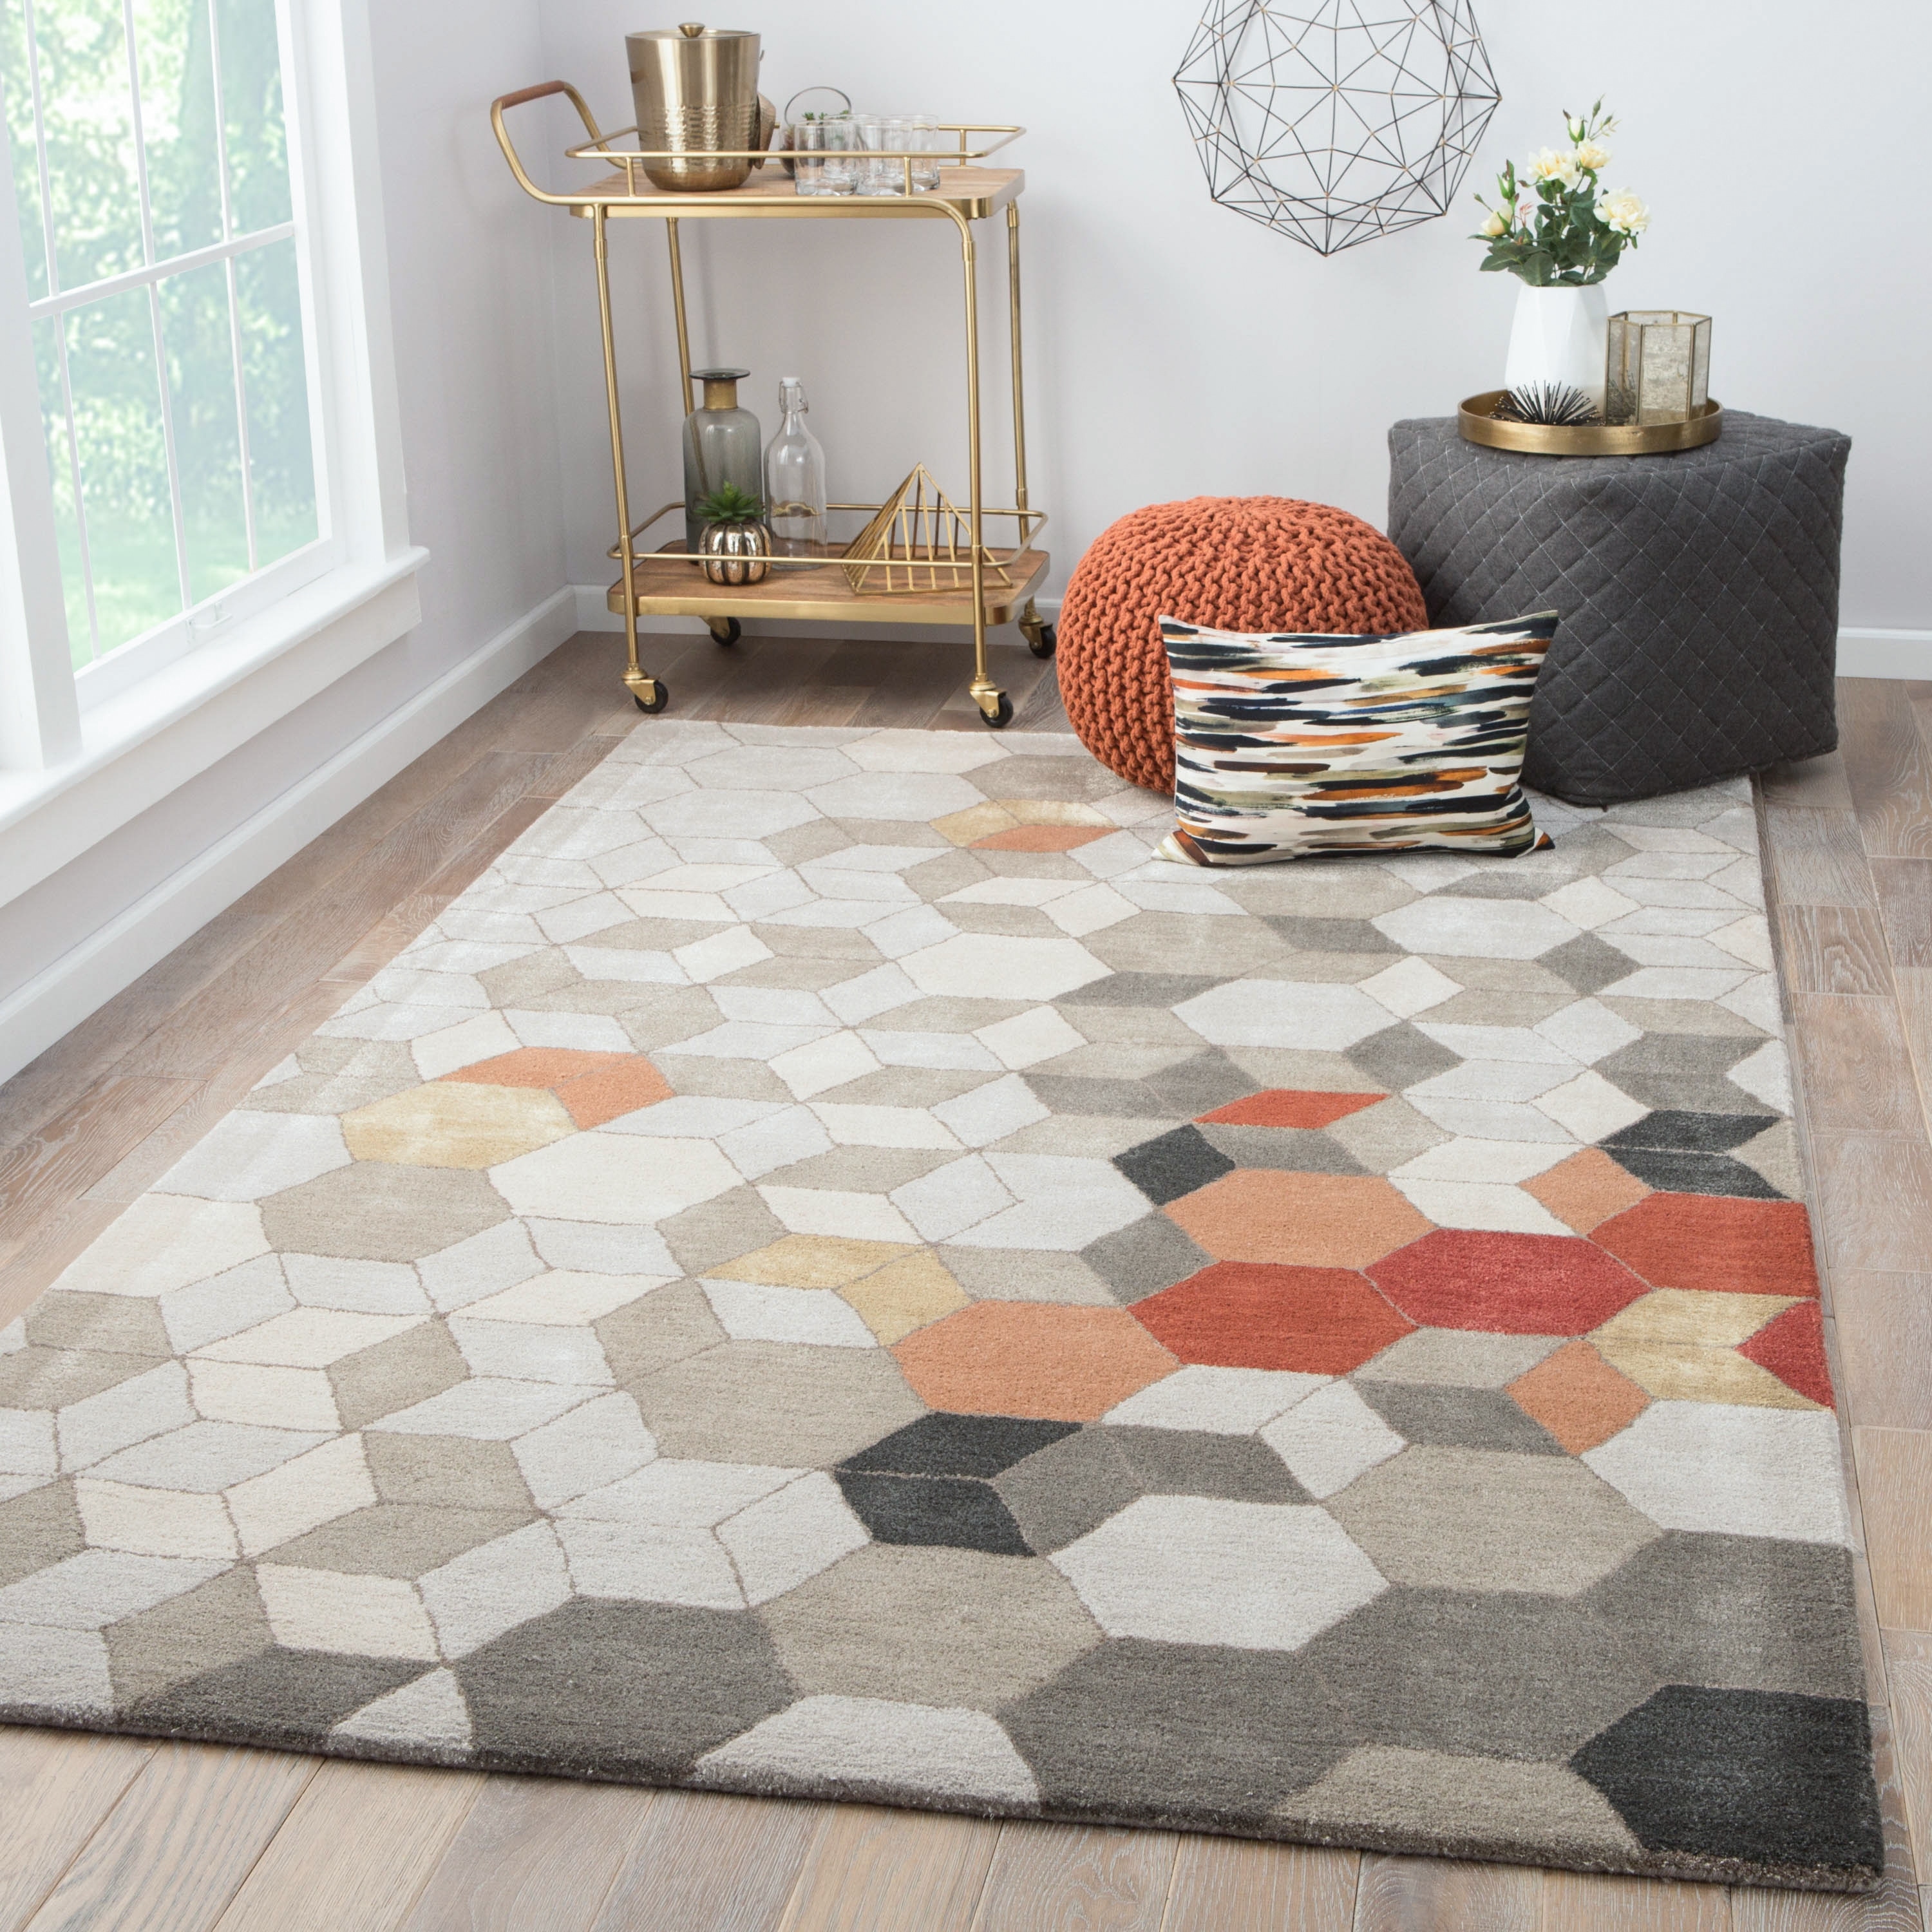 Orange Grey Outdoor Rug for Patio/Deck/Porch, Non-Slip Area Rug 5 x 8 Ft,  Middle Century Modern Geometric Abstract Art Indoor Outdoor Rugs Washable